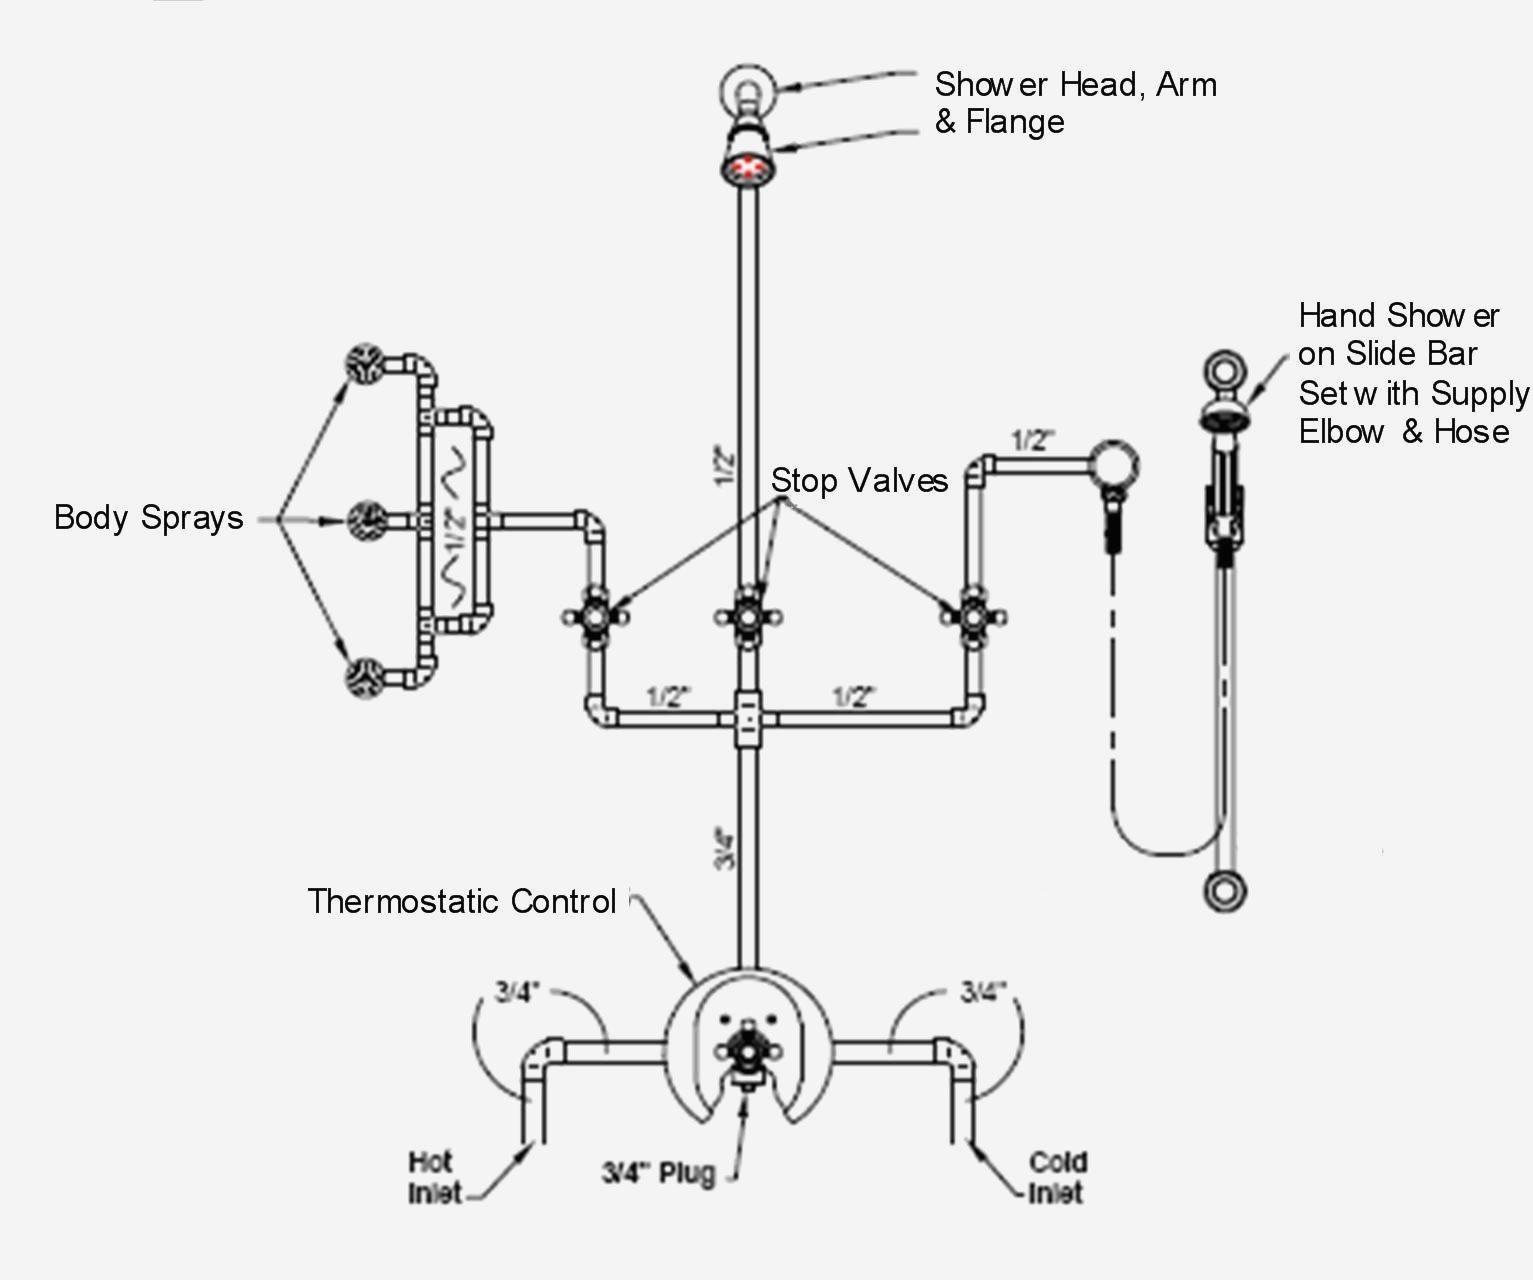 Grohe Faucet Parts Diagram Grohe Kitchen Faucets Parts Awesome Kitchen Amazing Grohe Kitchen Of Grohe Faucet Parts Diagram